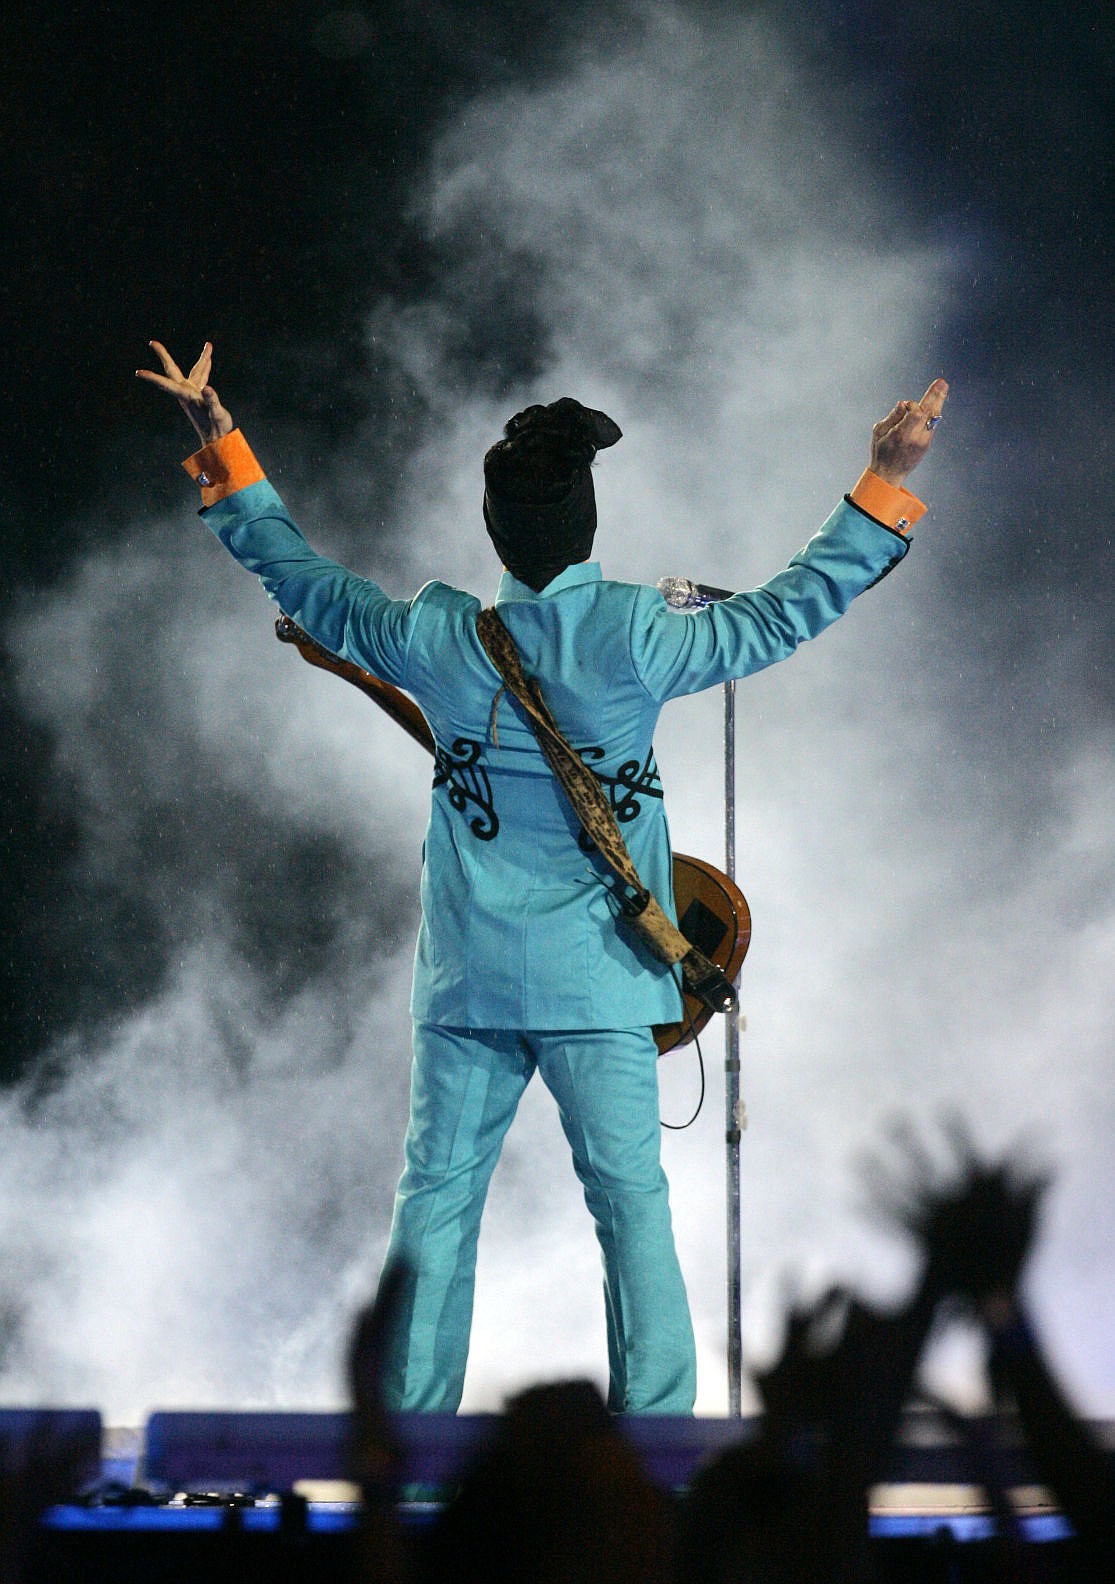 &lt;p&gt;FILE - In this Feb. 4, 2007 file photo, Prince performs during the halftime show at Super Bowl XLI at Dolphin Stadium in Miami. Prince's publicist has confirmed that Prince died at his home in Minnesota, Thursday, April 21, 2016. He was 57. (AP Photo/Chris Carlson, File)&lt;/p&gt;